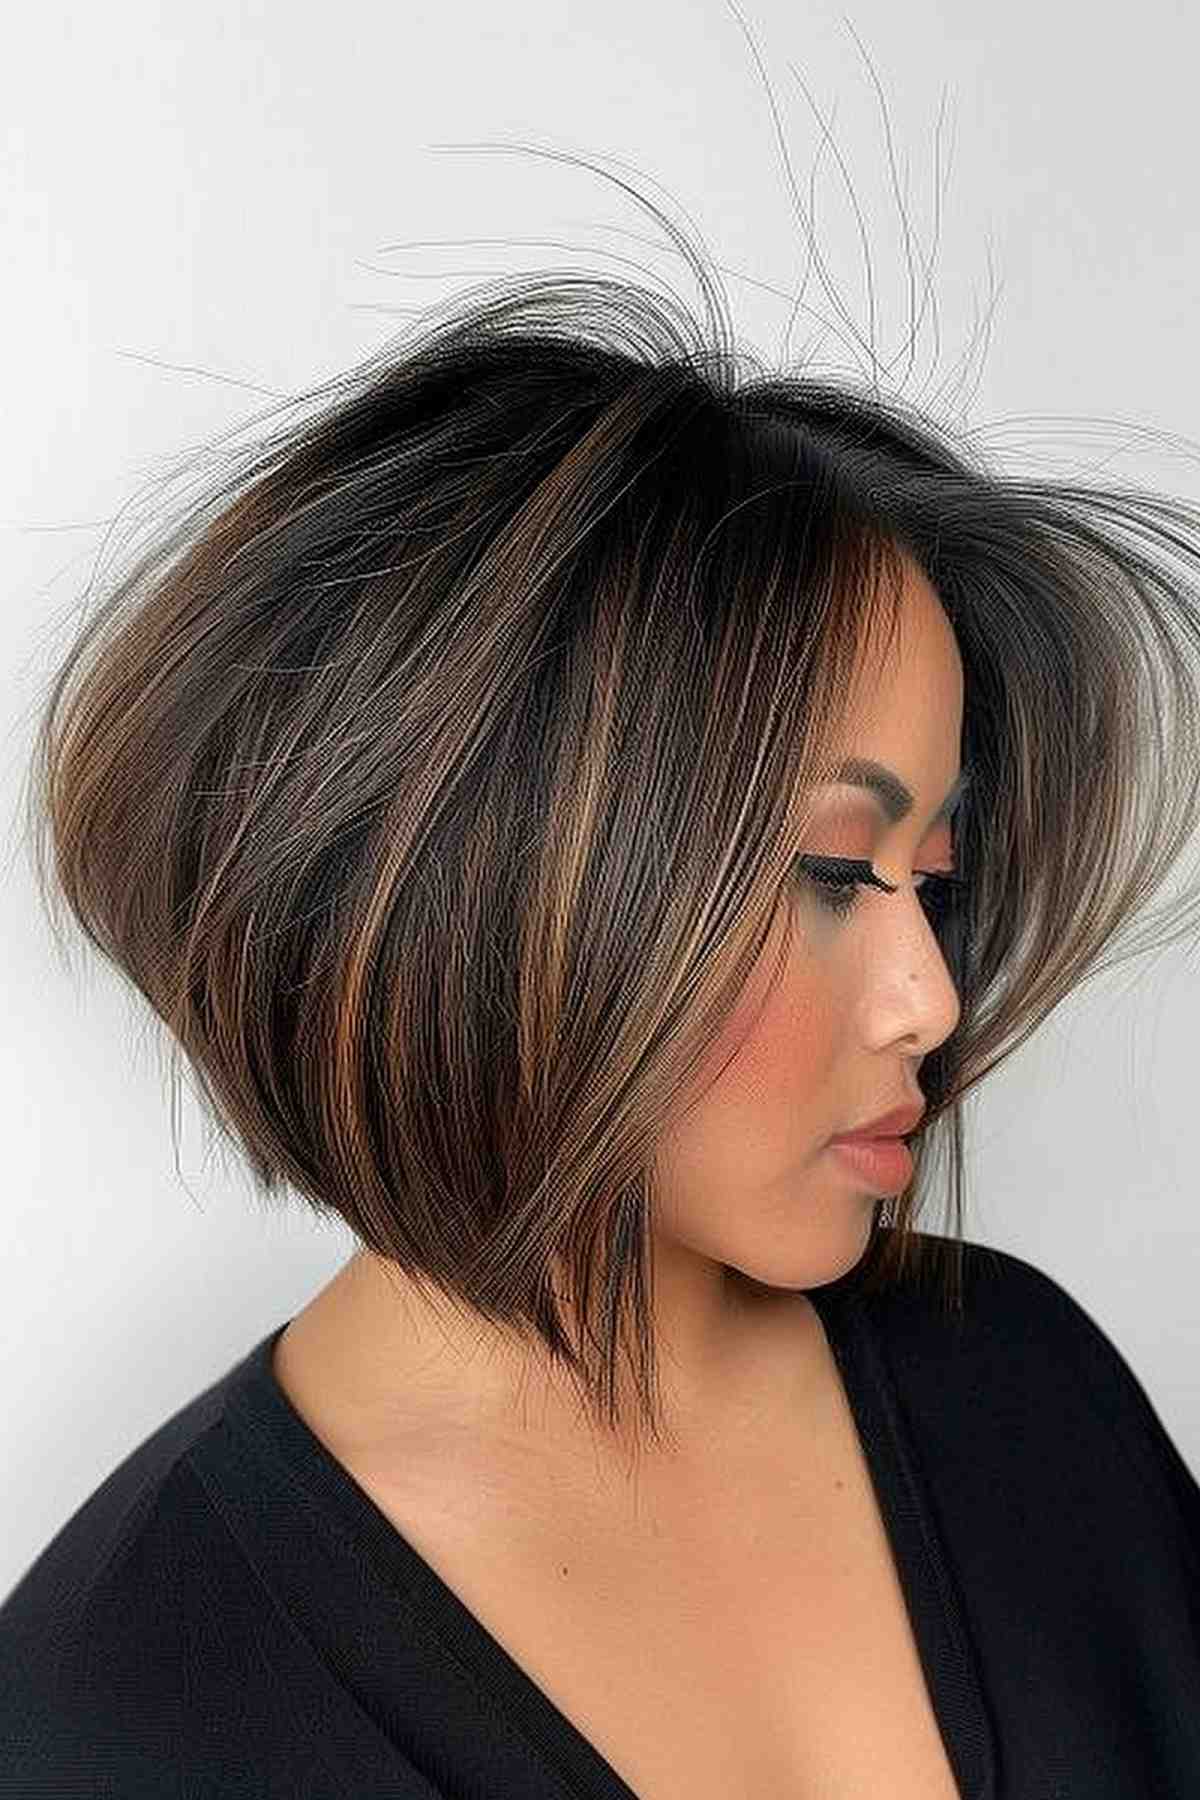 Stylish woman with dramatic highlighted angled bob hairstyle